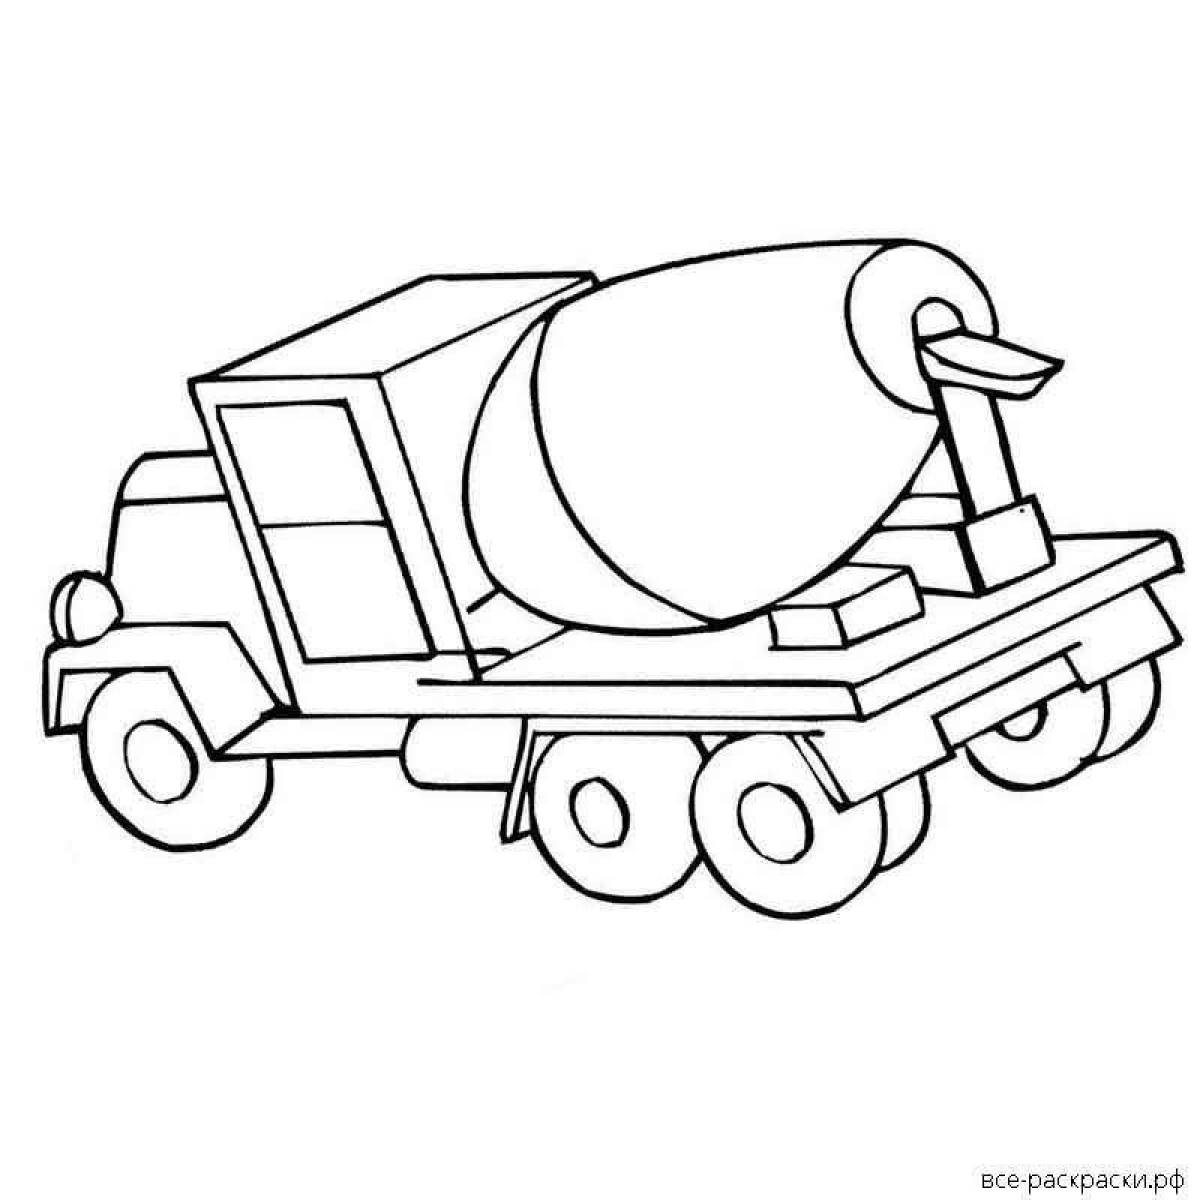 Glowing concrete mixer coloring page